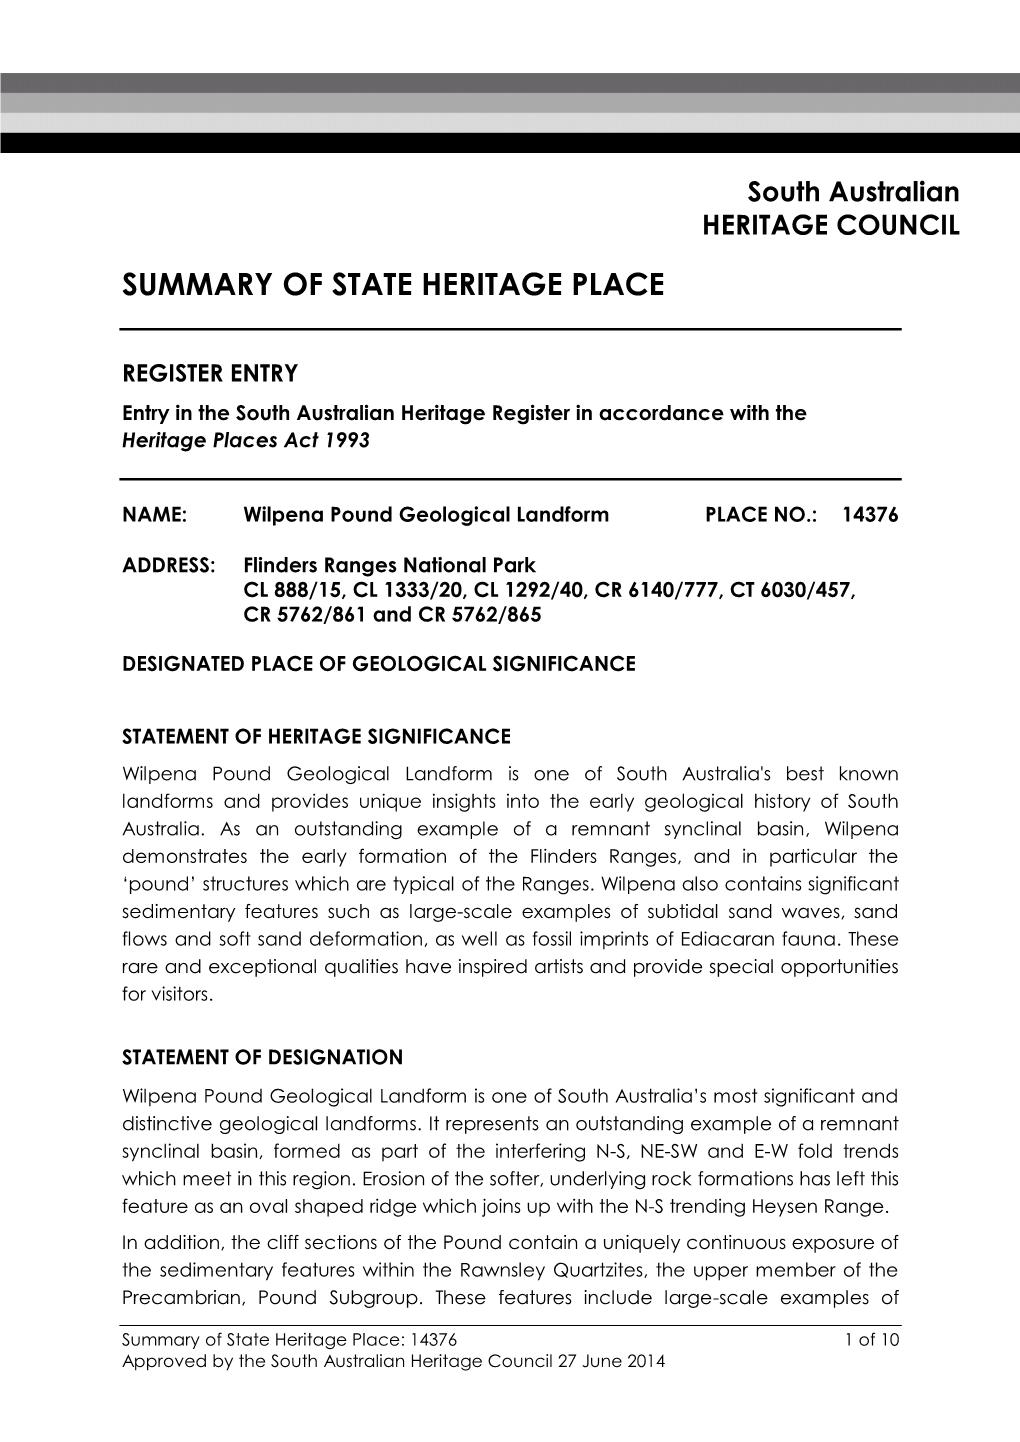 Summary of State Heritage Place